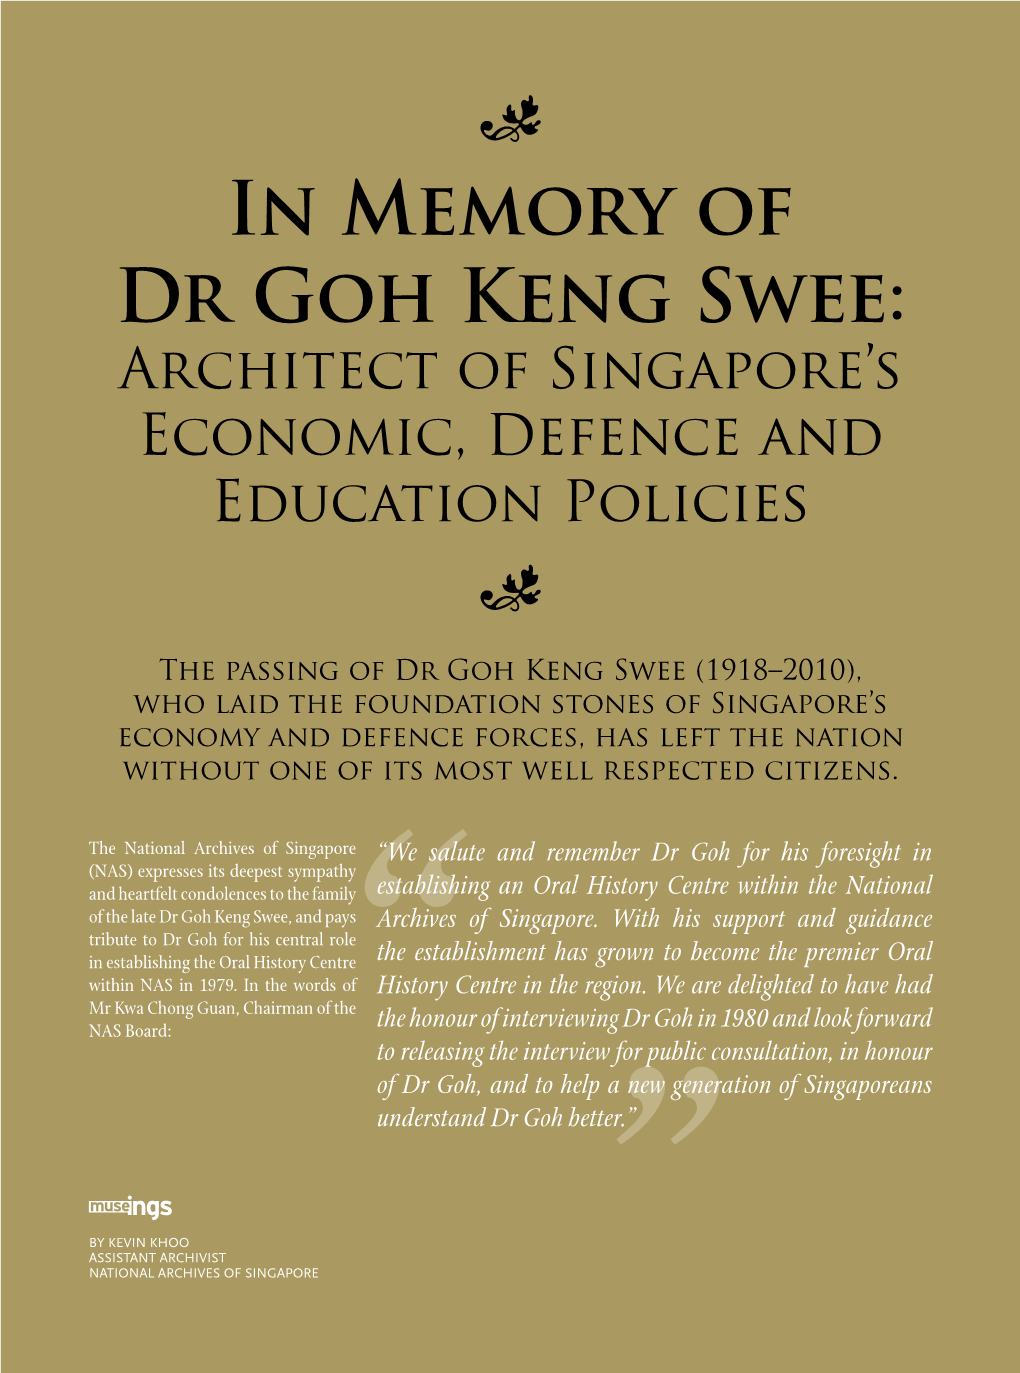 In Memory of Dr Goh Keng Swee: Architect of Singapore’S Economic, Defence and Education Policies